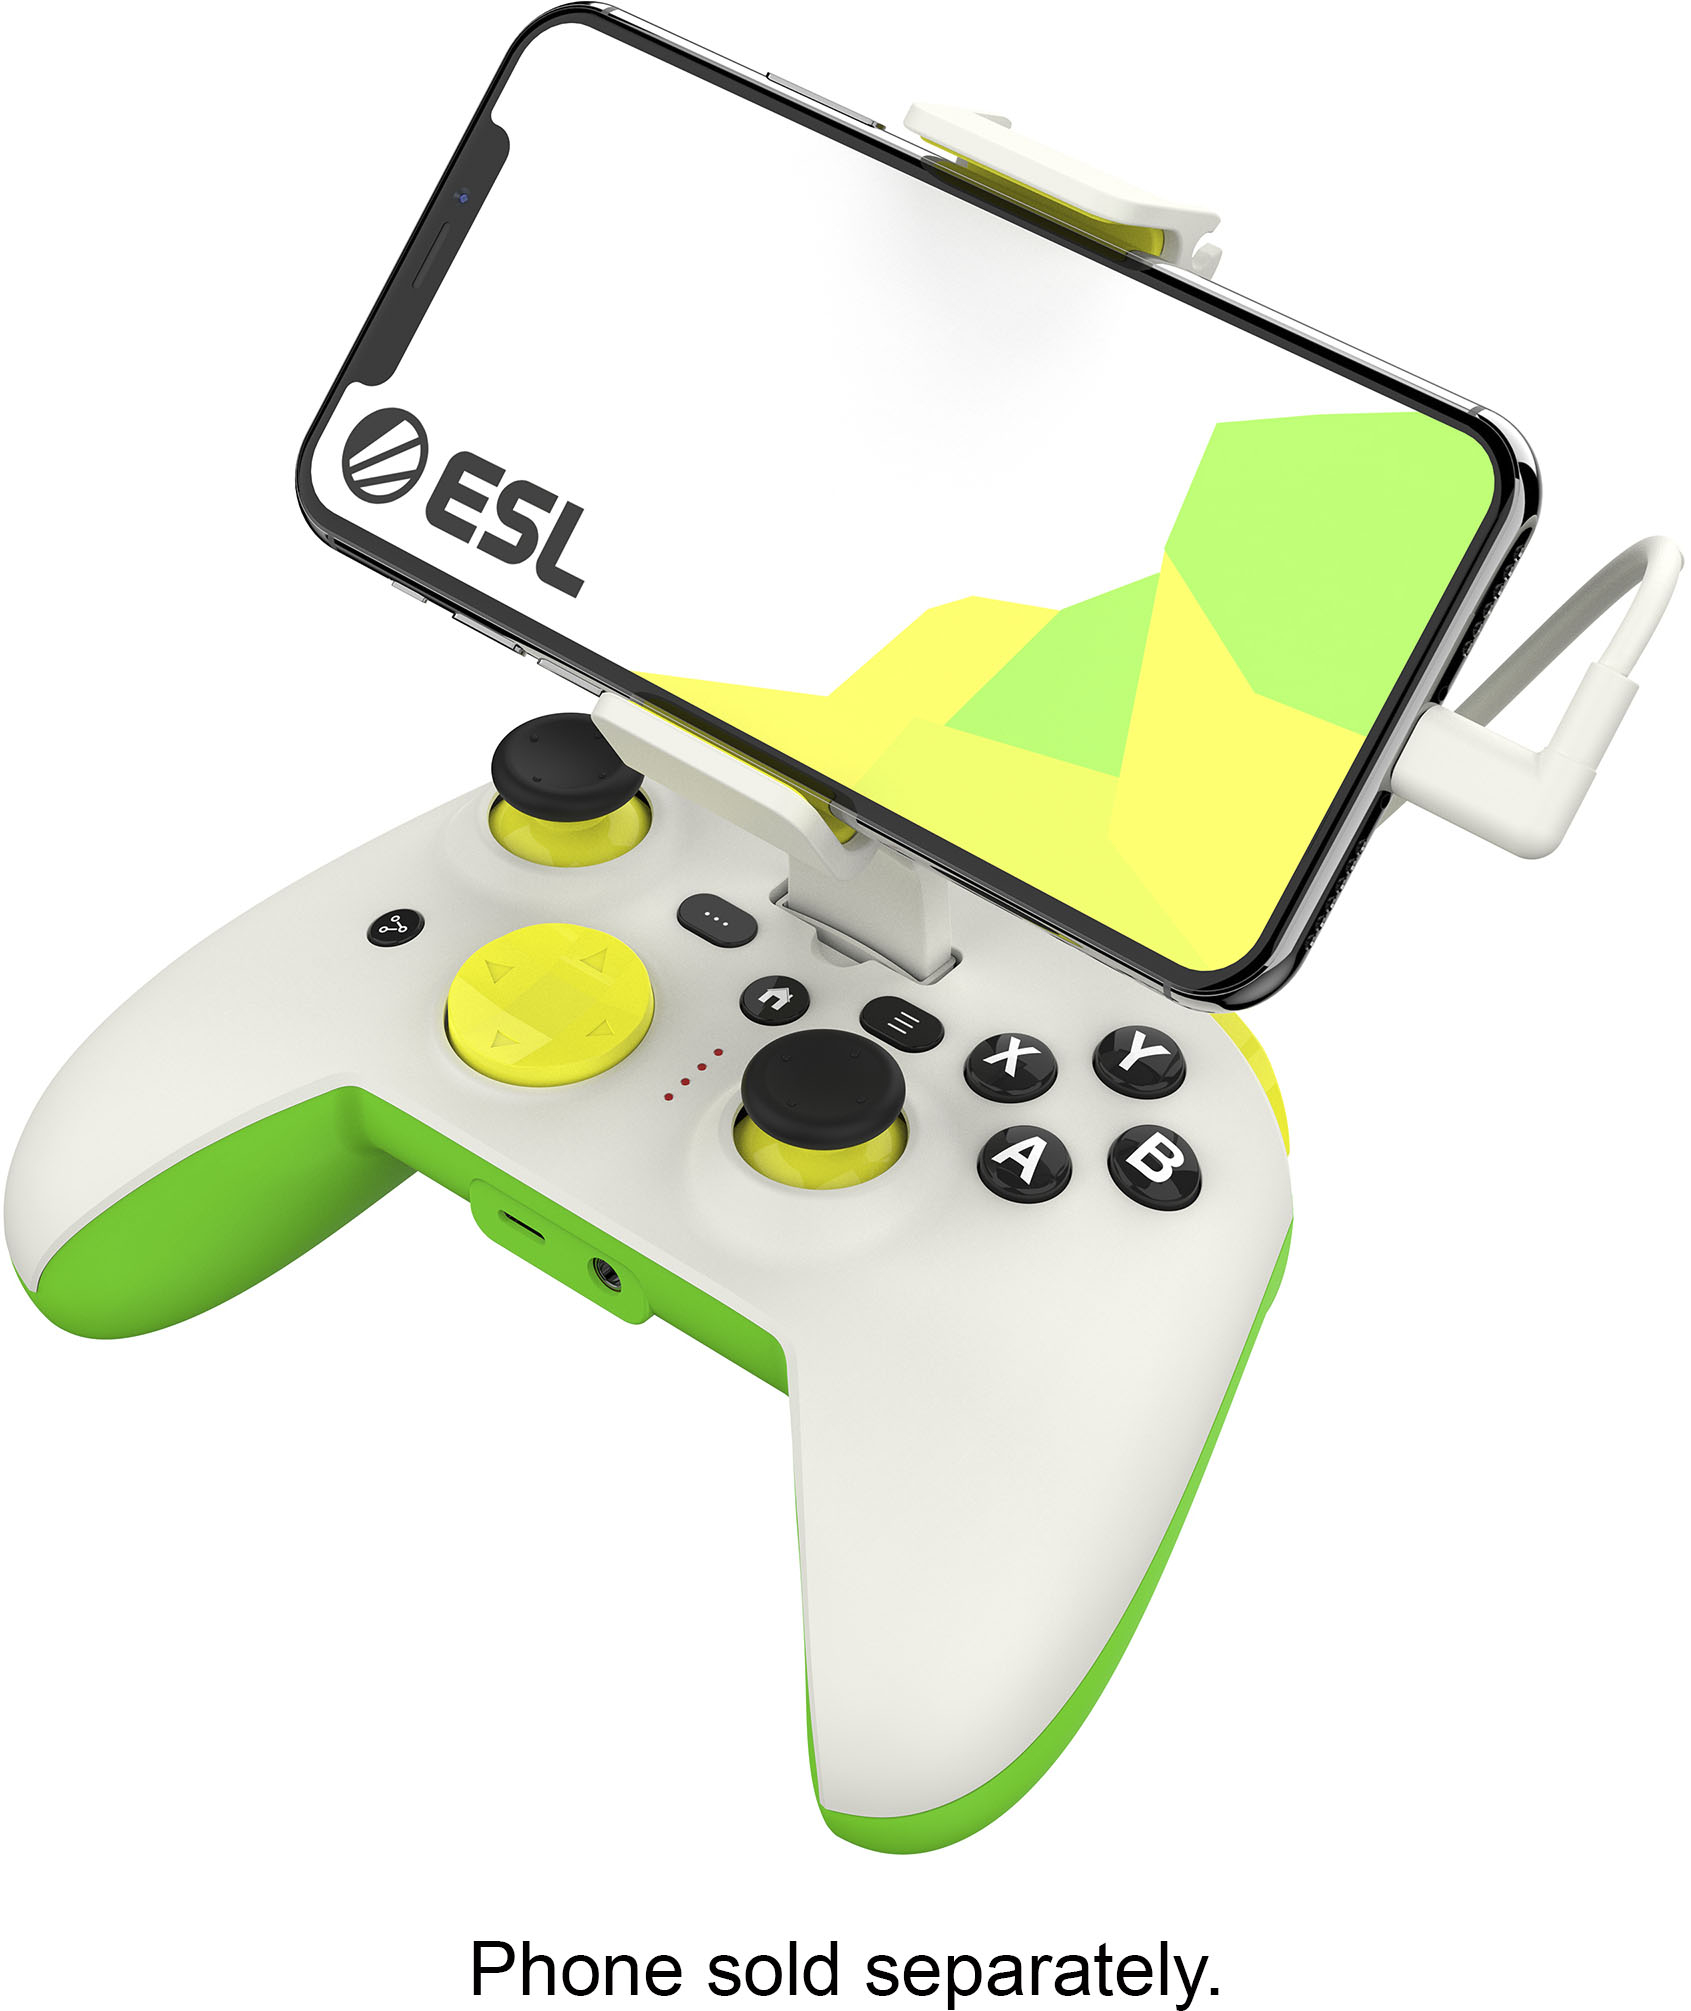 RiotPWR - RP1950ESL Controller  for Apple iOS7 or later devices - Yellow/Green